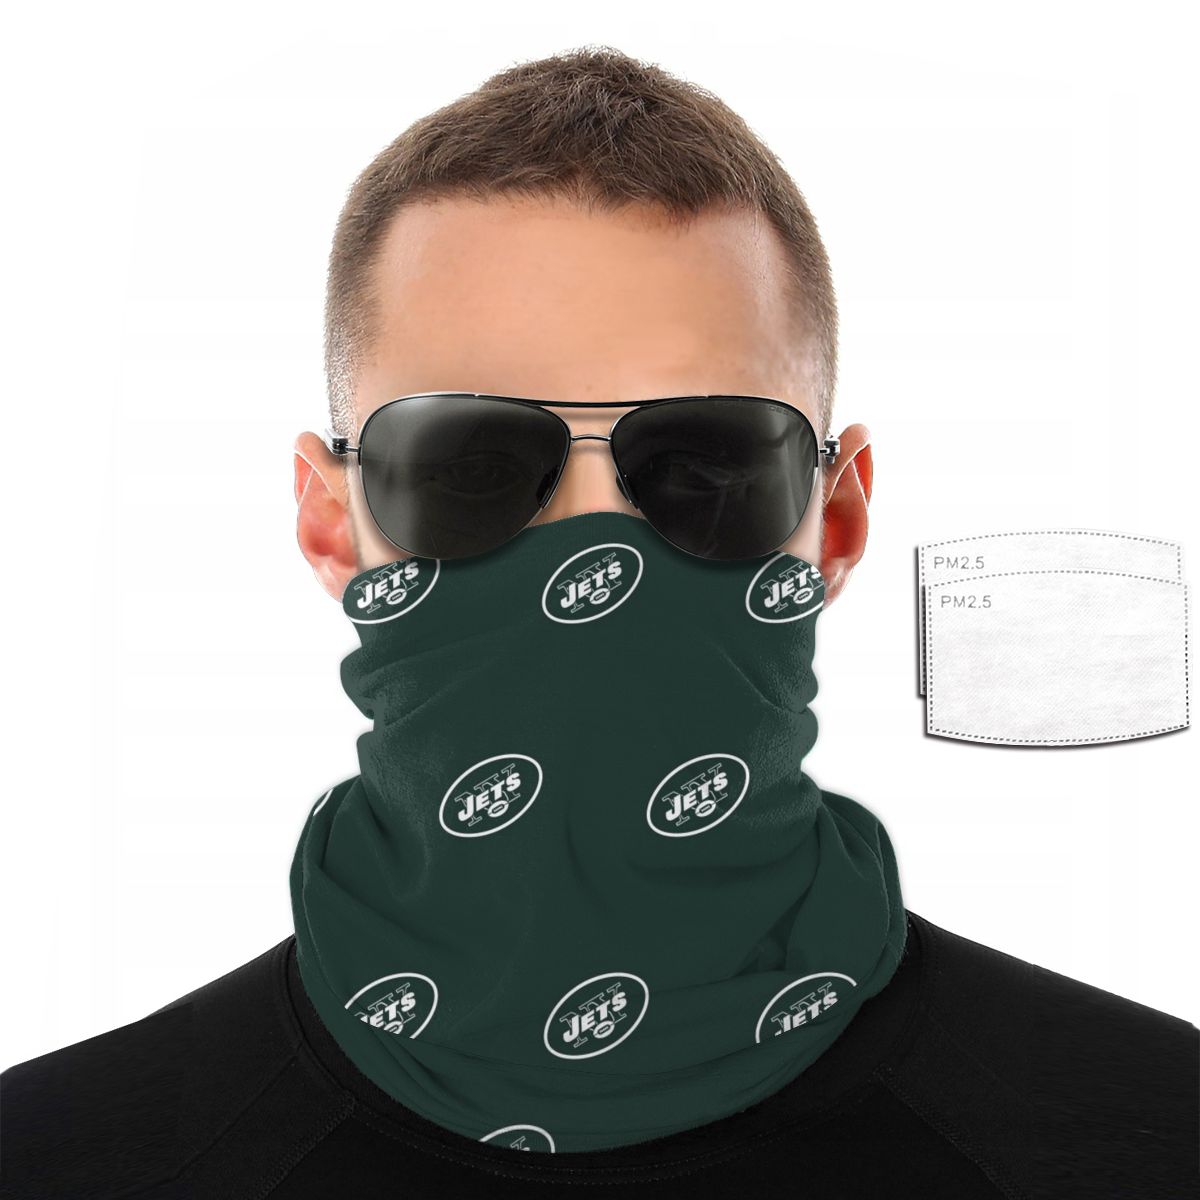 Reusble Mouth Cover Bandanas New York Jets Variety Head Scarf Face Mask With PM 2.5 Filter